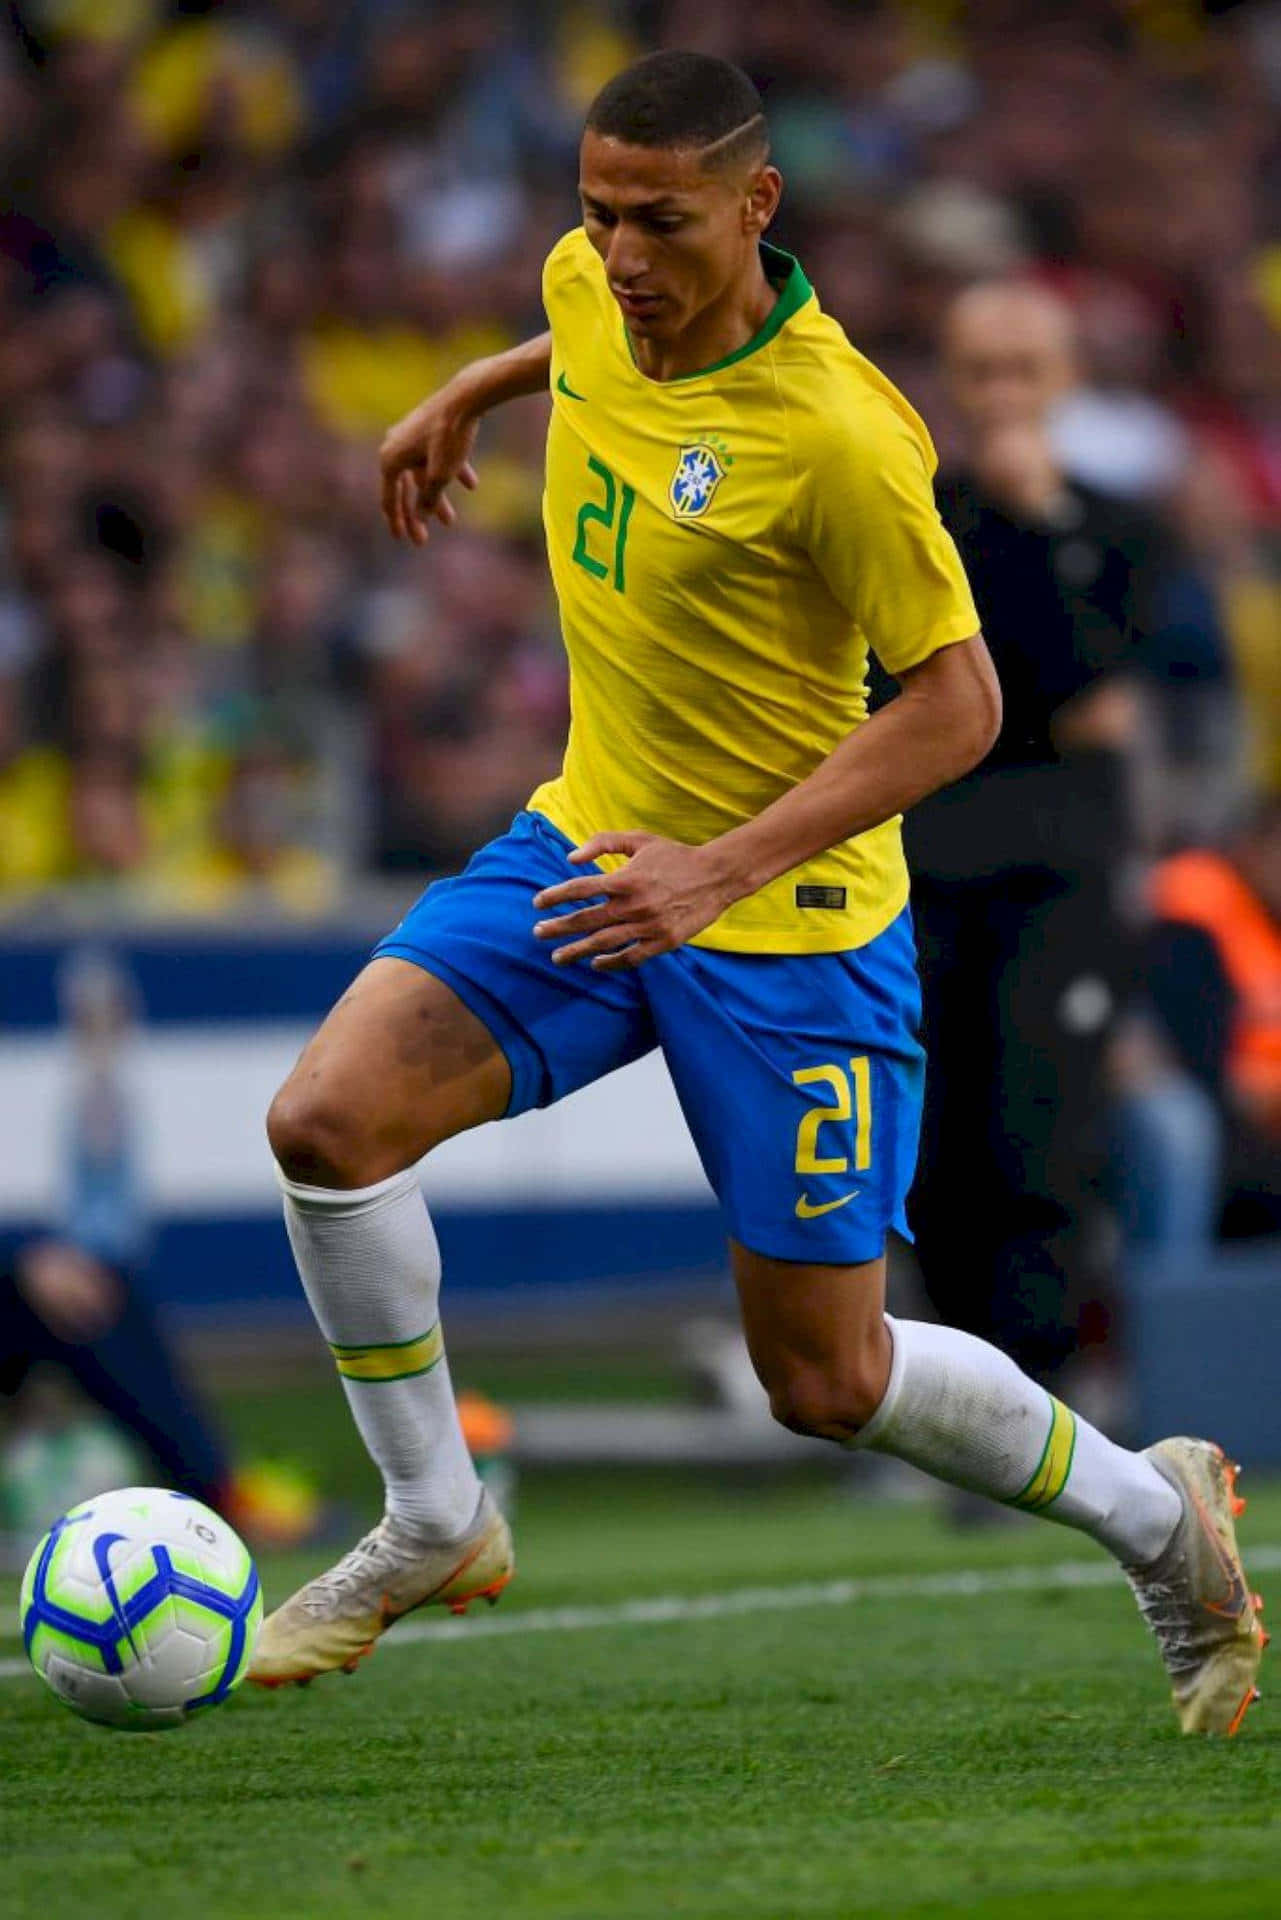 Dynamic Soccer Player Performing A Dribble Wallpaper